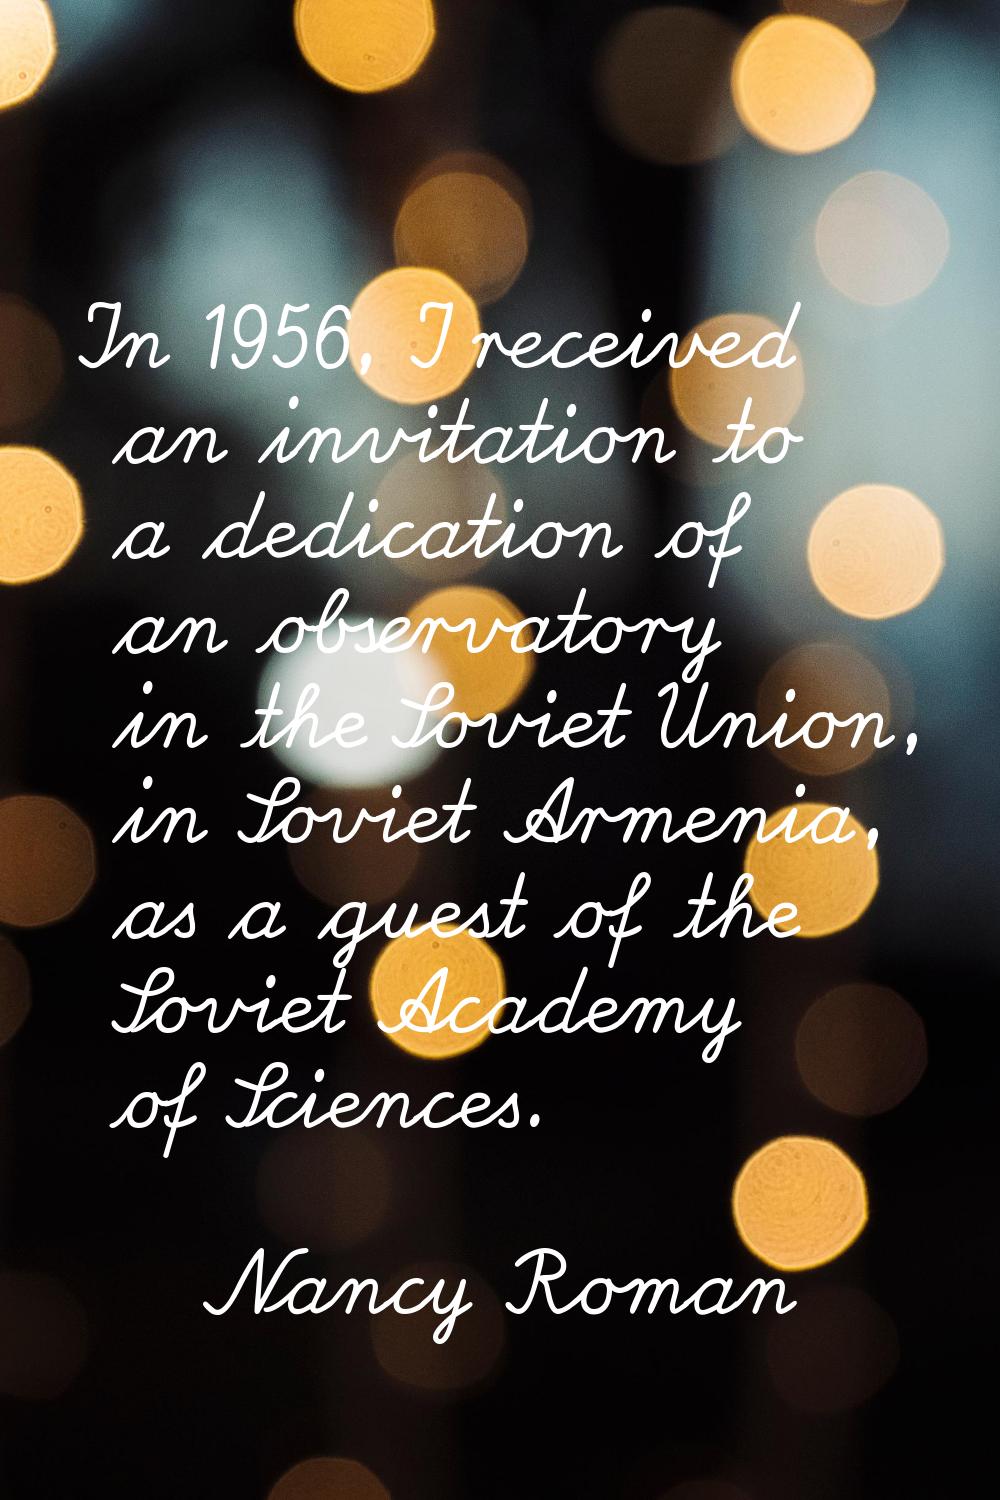 In 1956, I received an invitation to a dedication of an observatory in the Soviet Union, in Soviet 